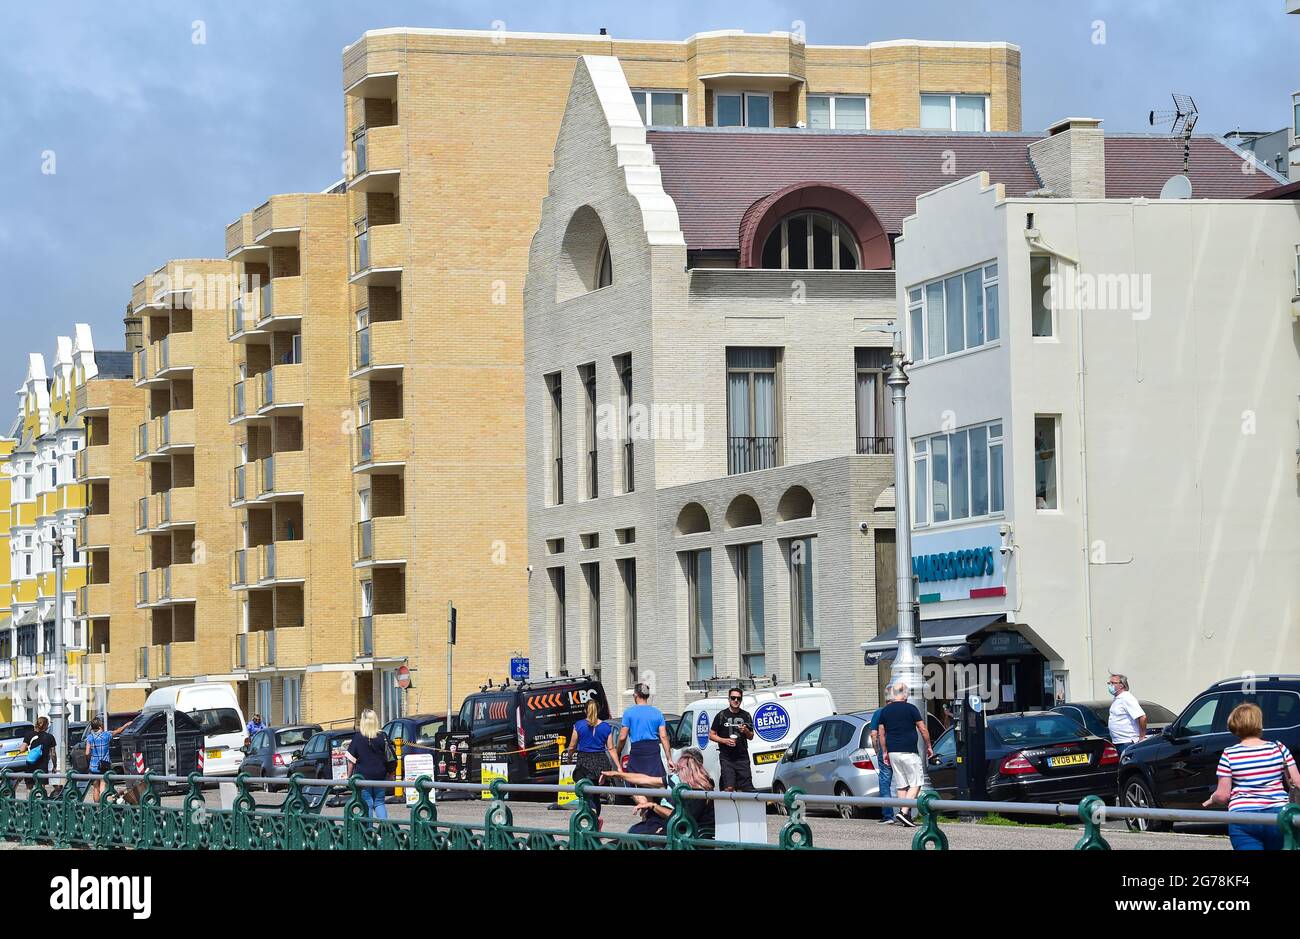 Newly refurbished Medina House on Hove seafront . A former Turkish bath the building has been rebuilt by Pink Floyd guitarist Dave Gilmour - UK Stock Photo